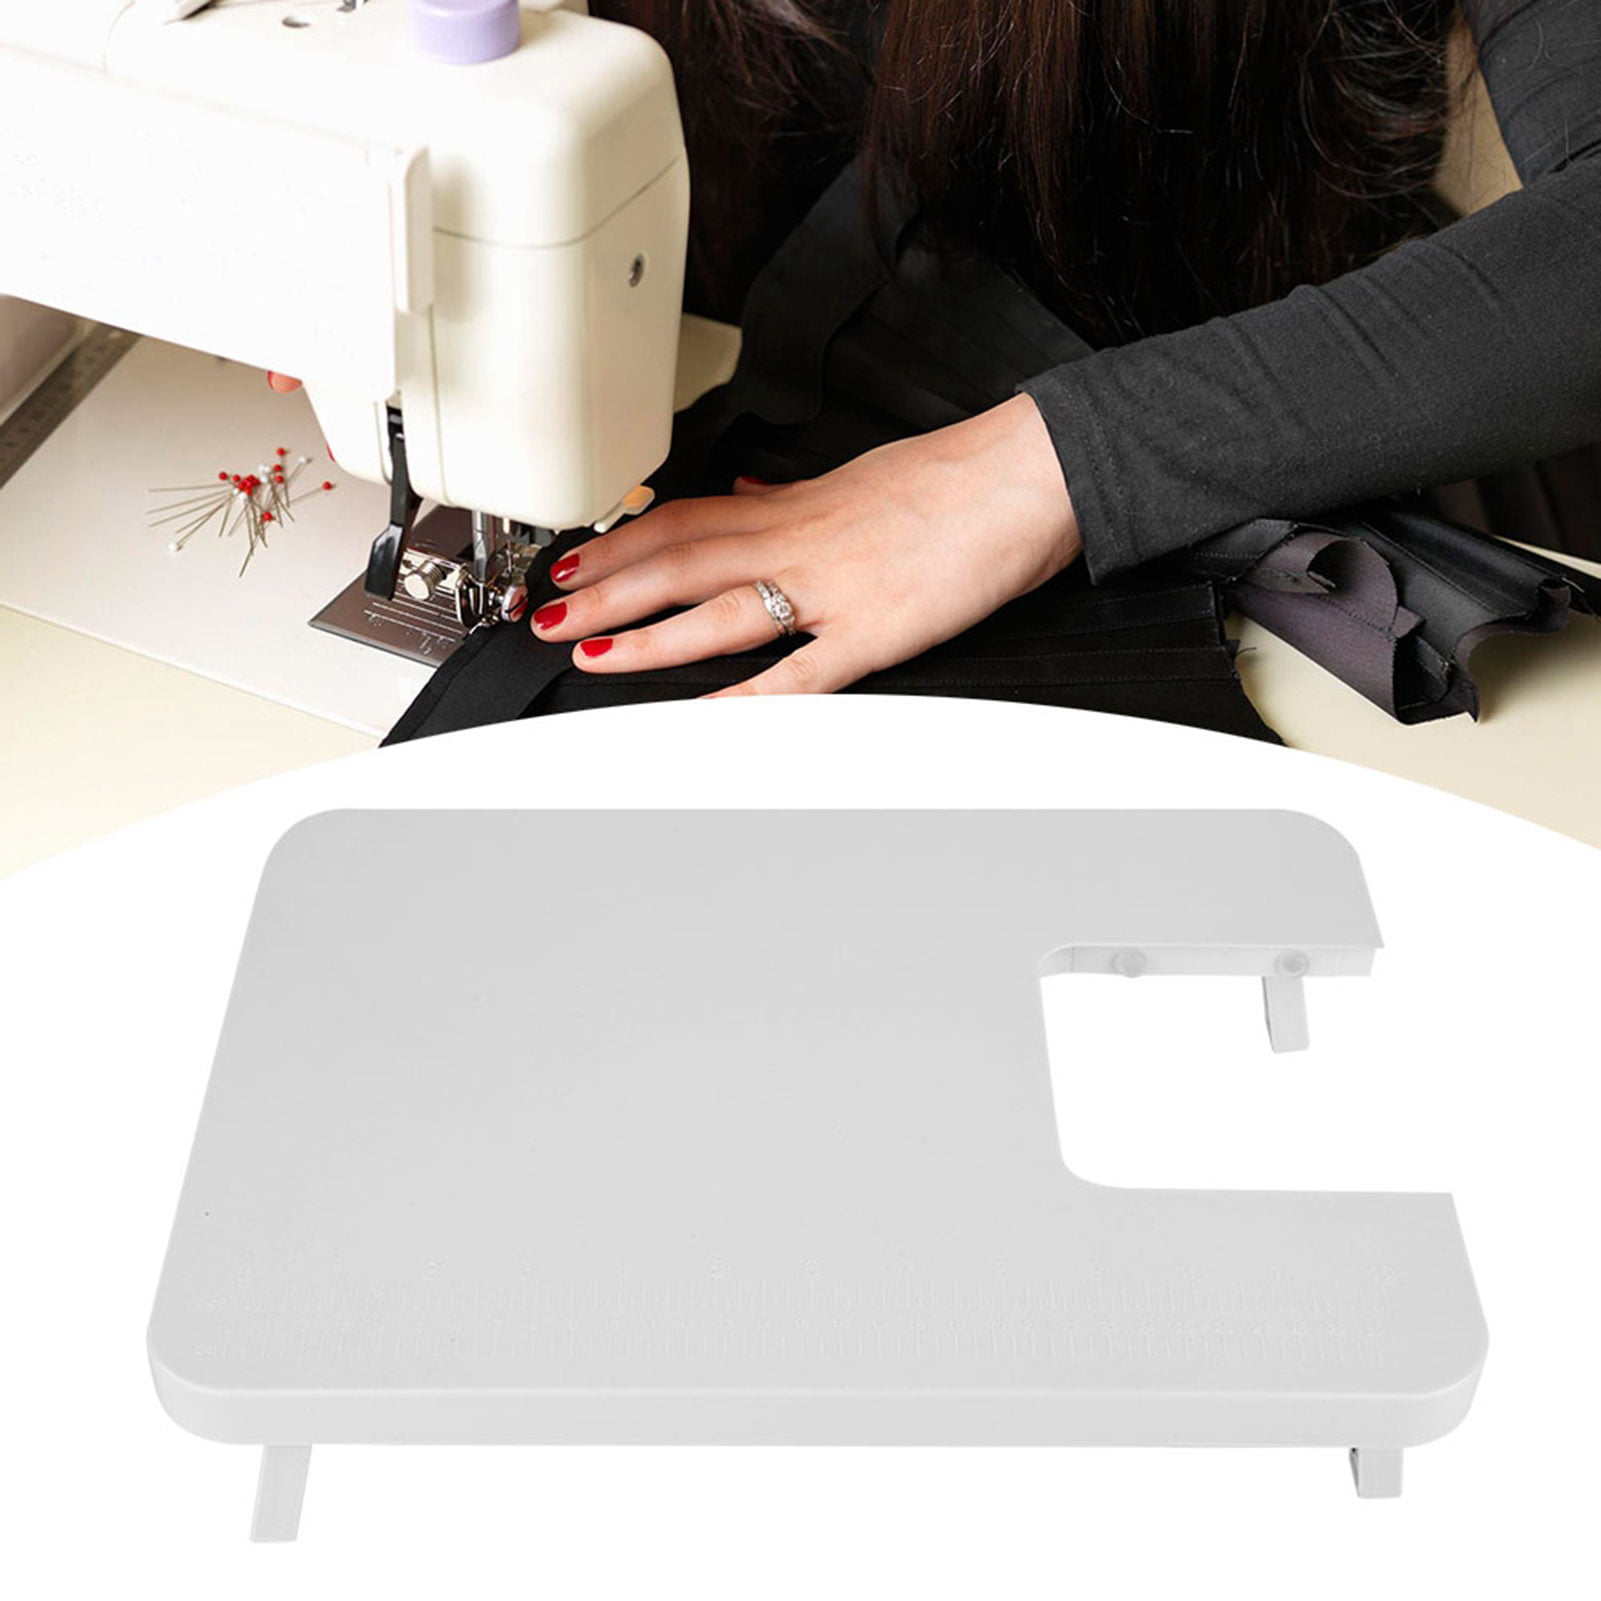 Loewten Extension Table, 35.5*25.3*2cm/13.9*9.9*0.78inch Sewing Machine  Table, Foldable Sewing Machine Extension Table For Beginners Tailor 